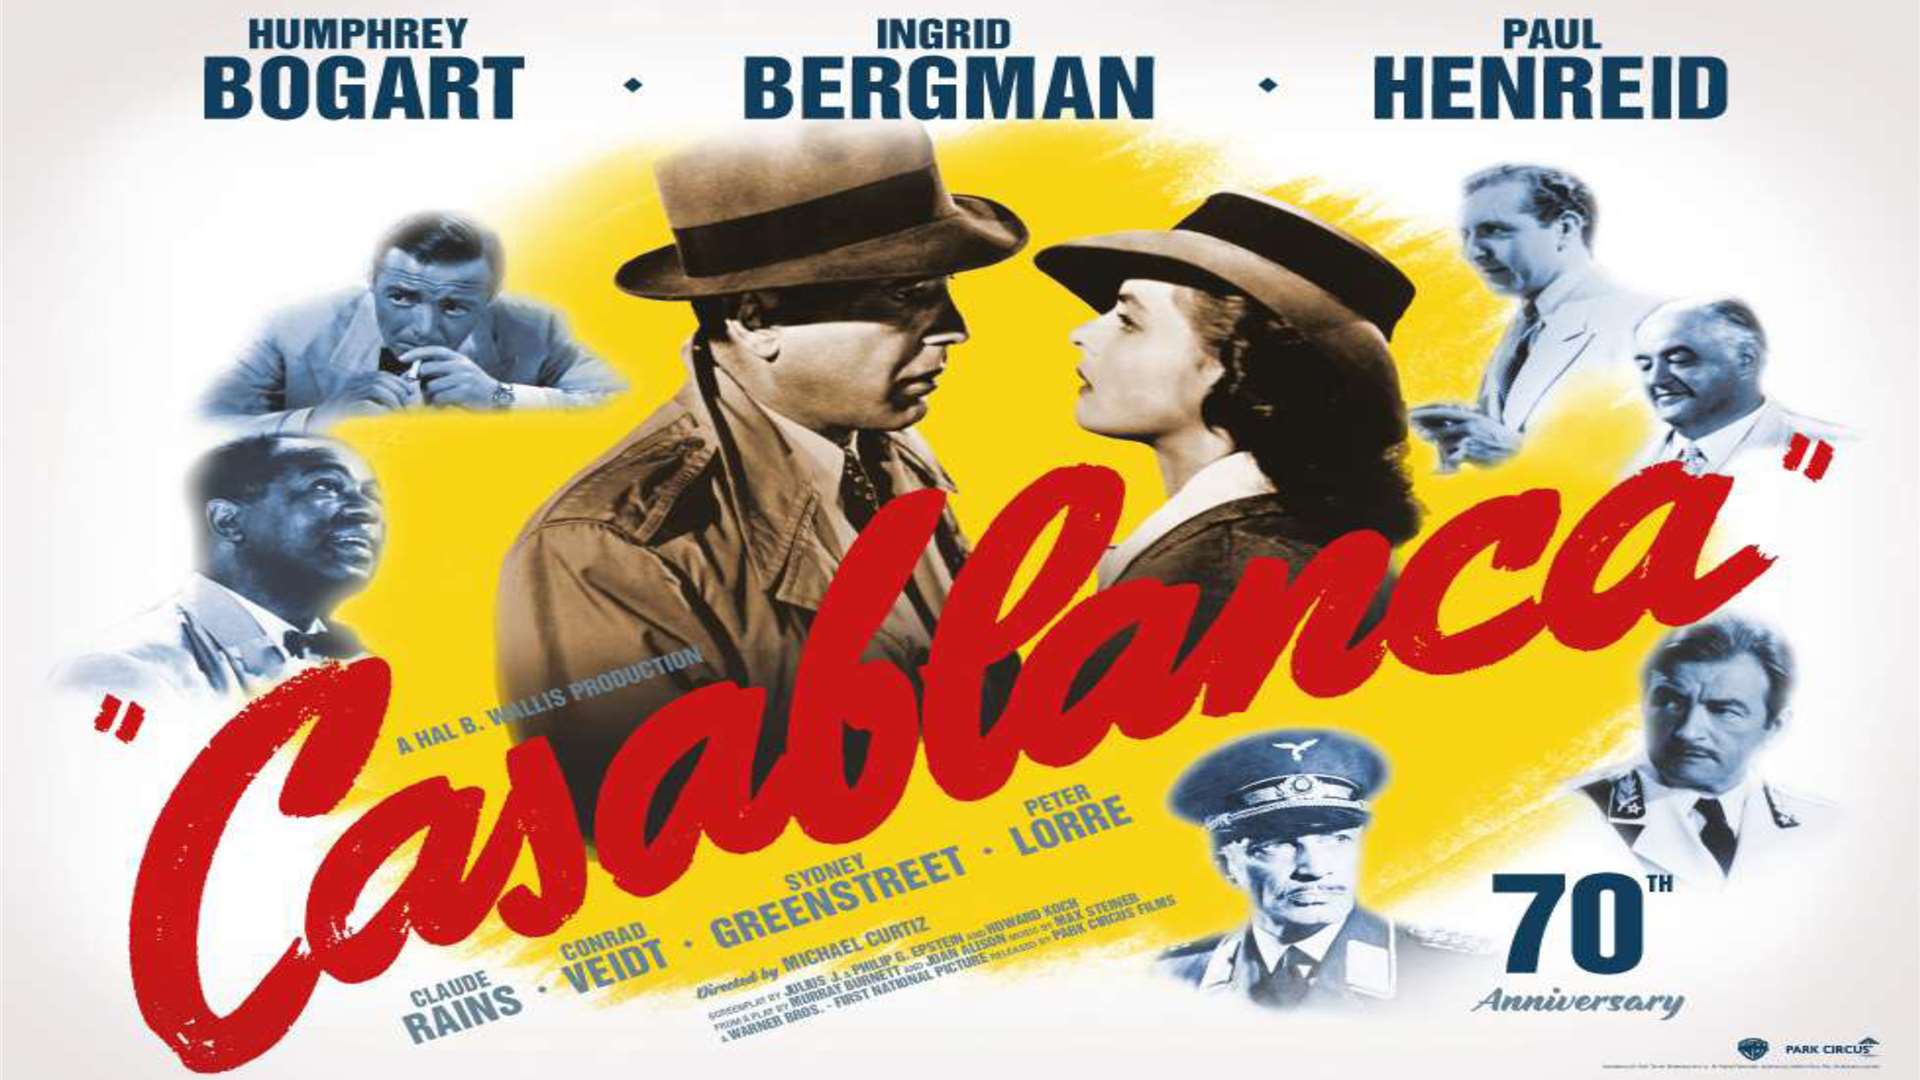 The movie poster for Casablanca